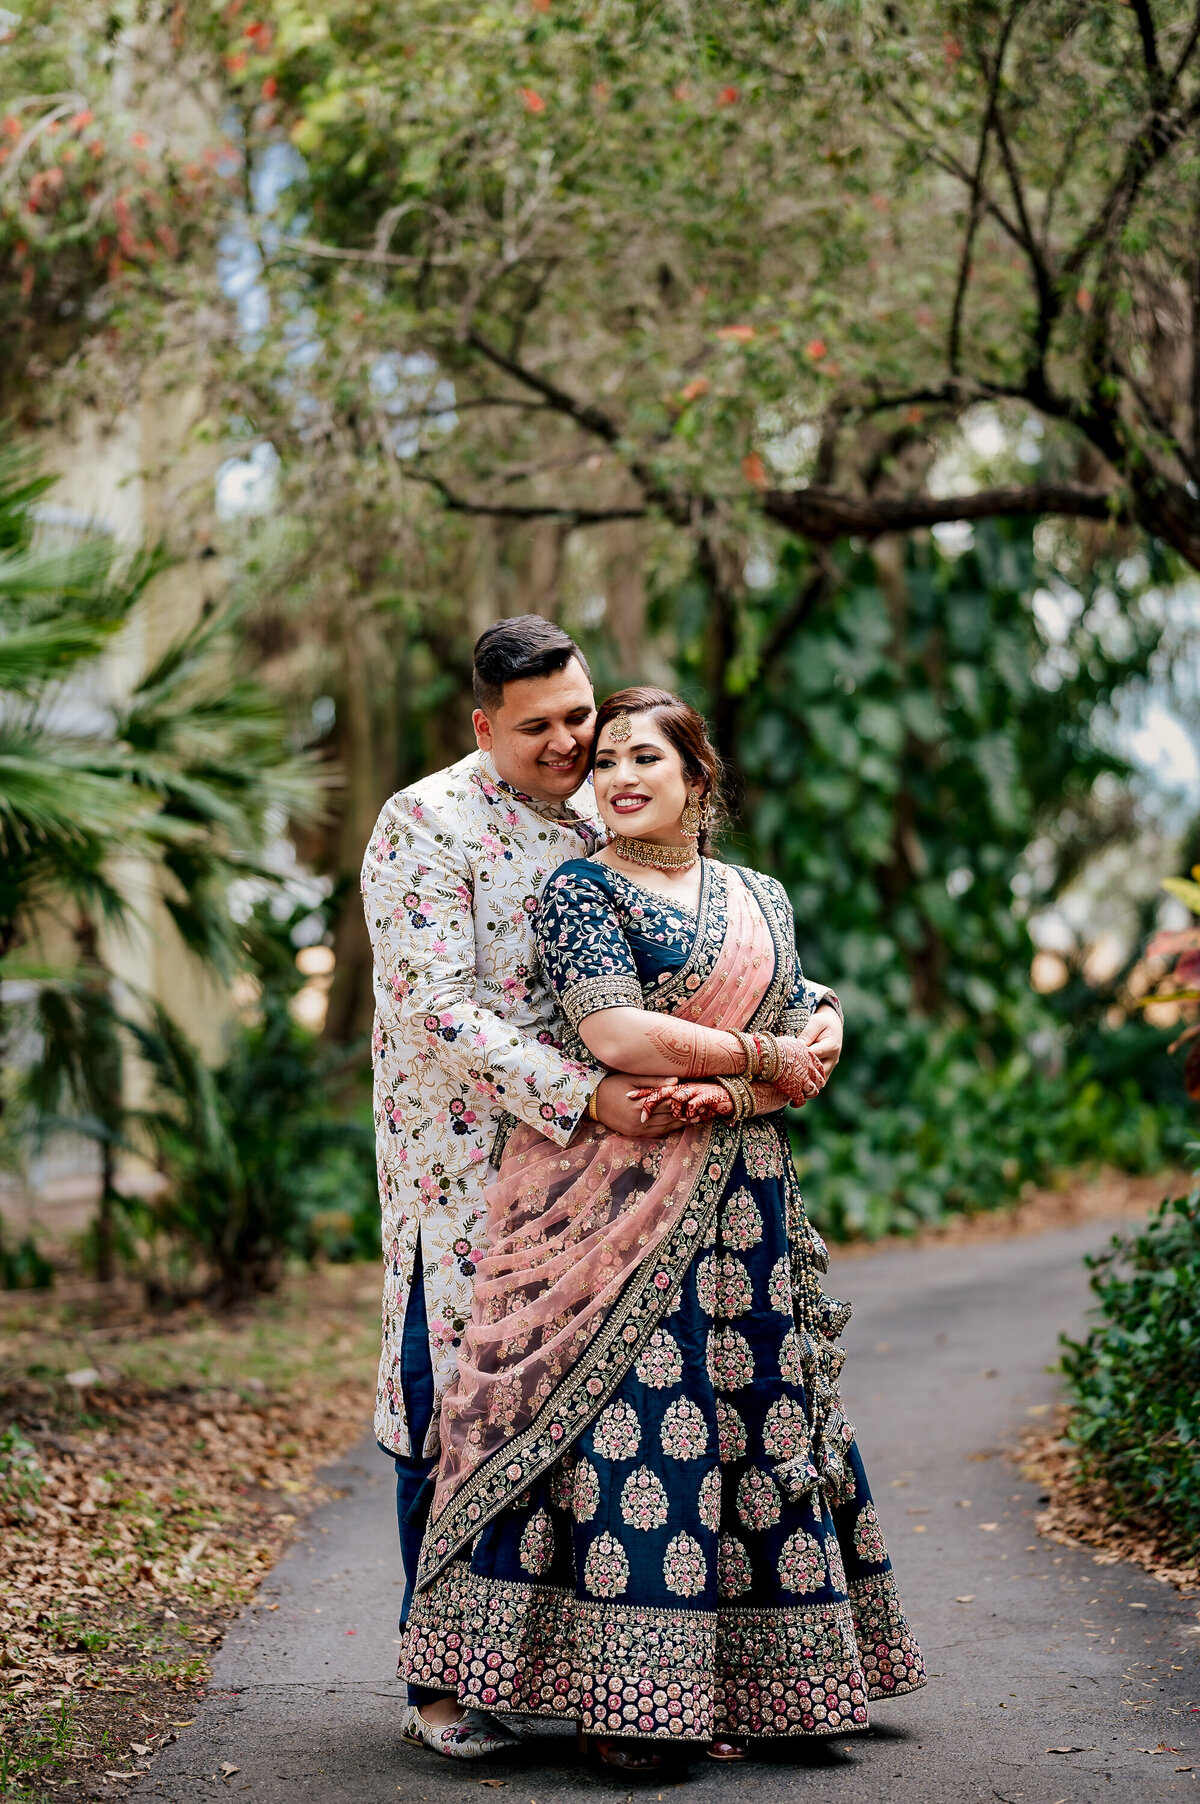 Ishan Fotografi is rated one of the best Indian wedding photographers in NJ. Get a free quote today.